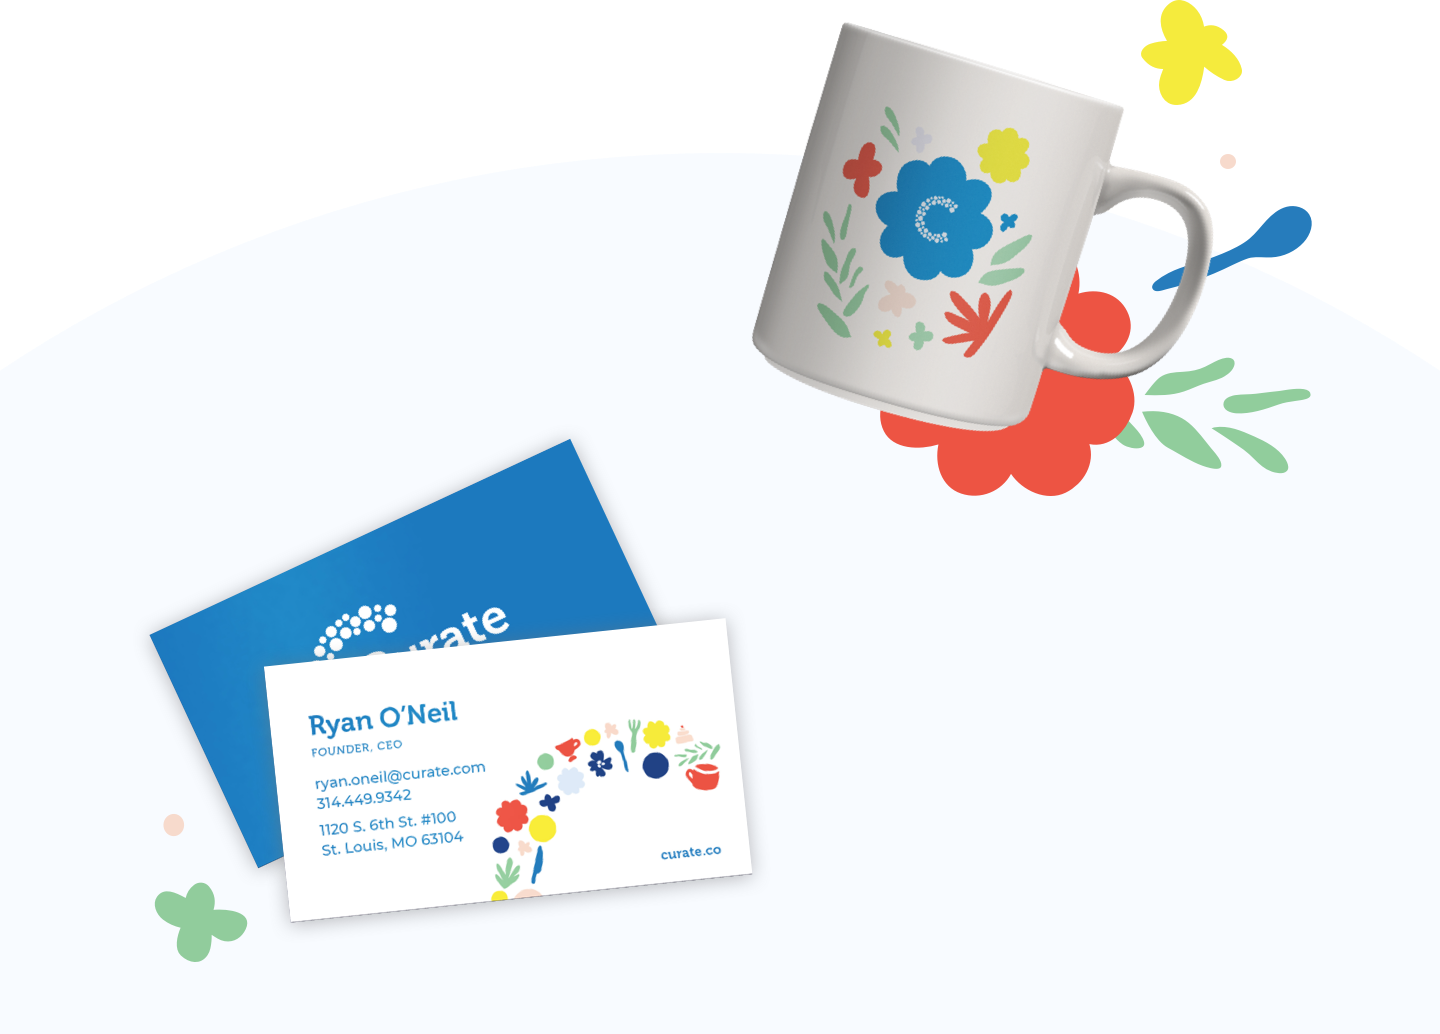 Mug and business cards with Curate branding